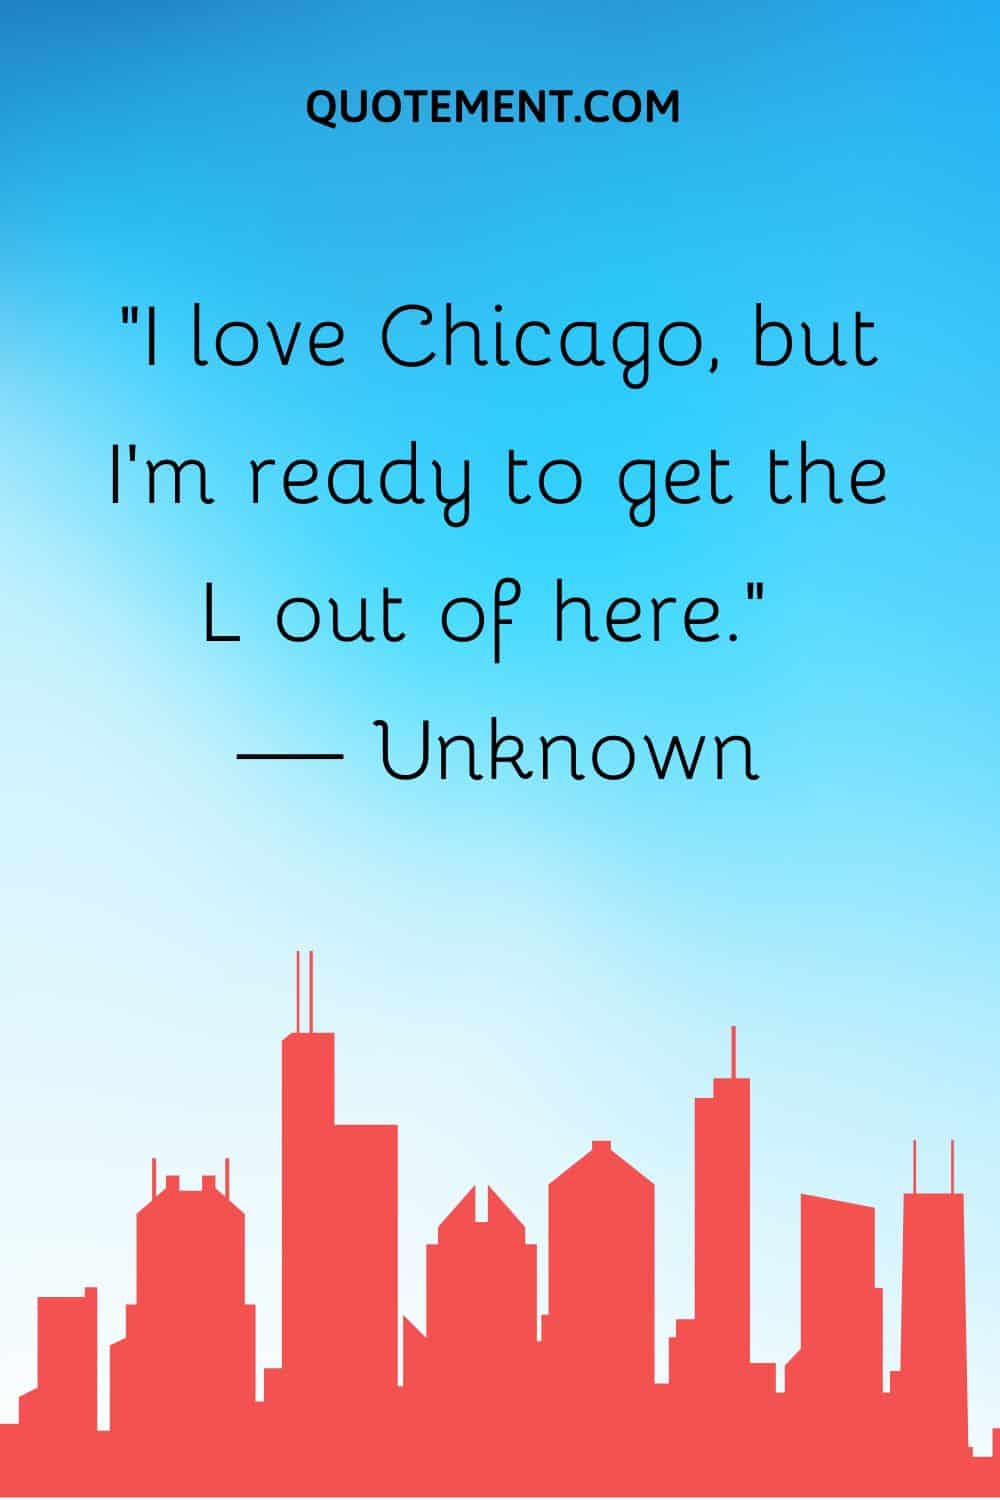 “I love Chicago, but I’m ready to get the L out of here.” — Unknown